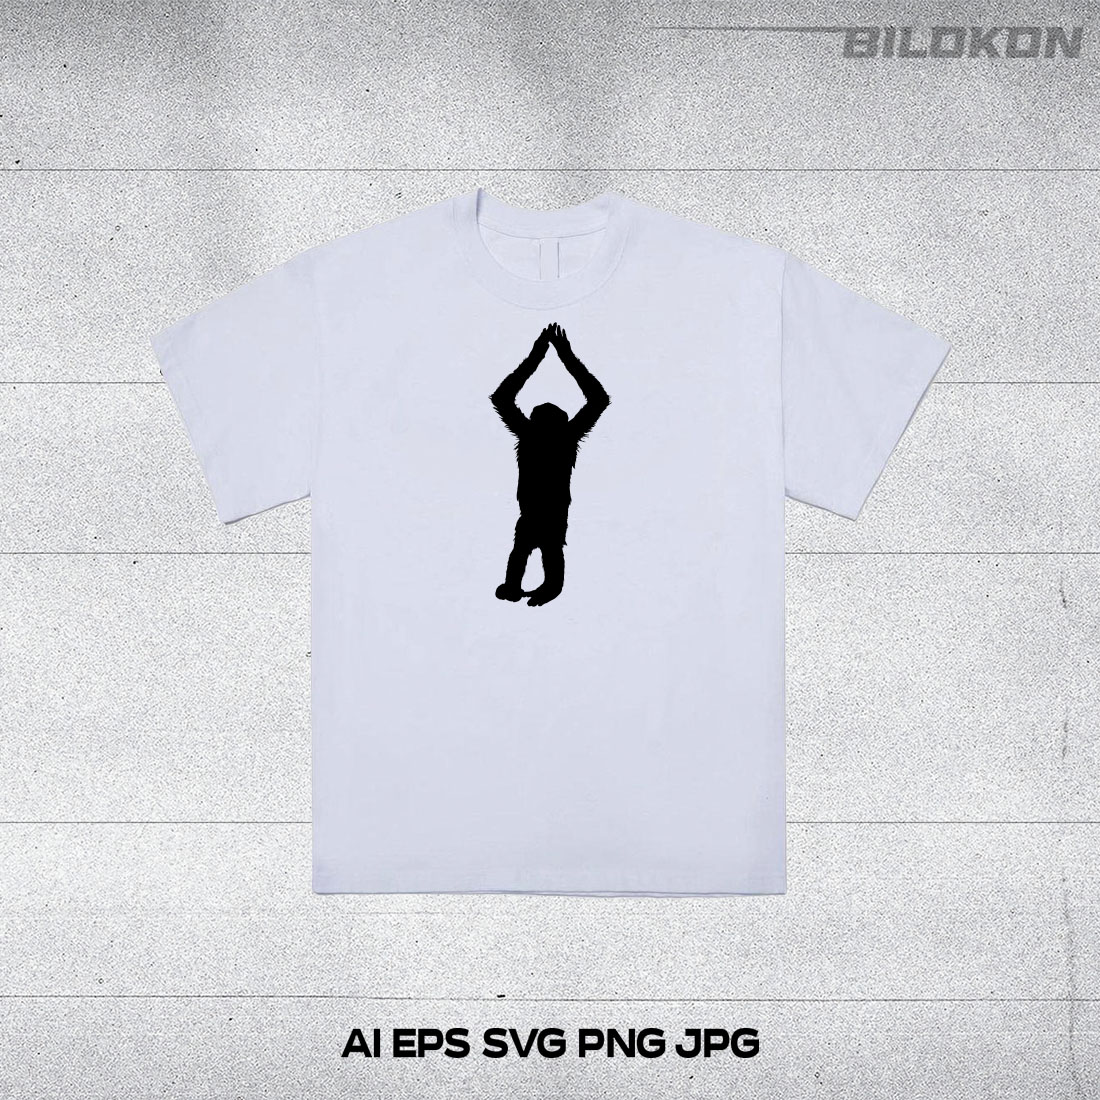 White t - shirt with a black silhouette of a person doing a yoga pose.